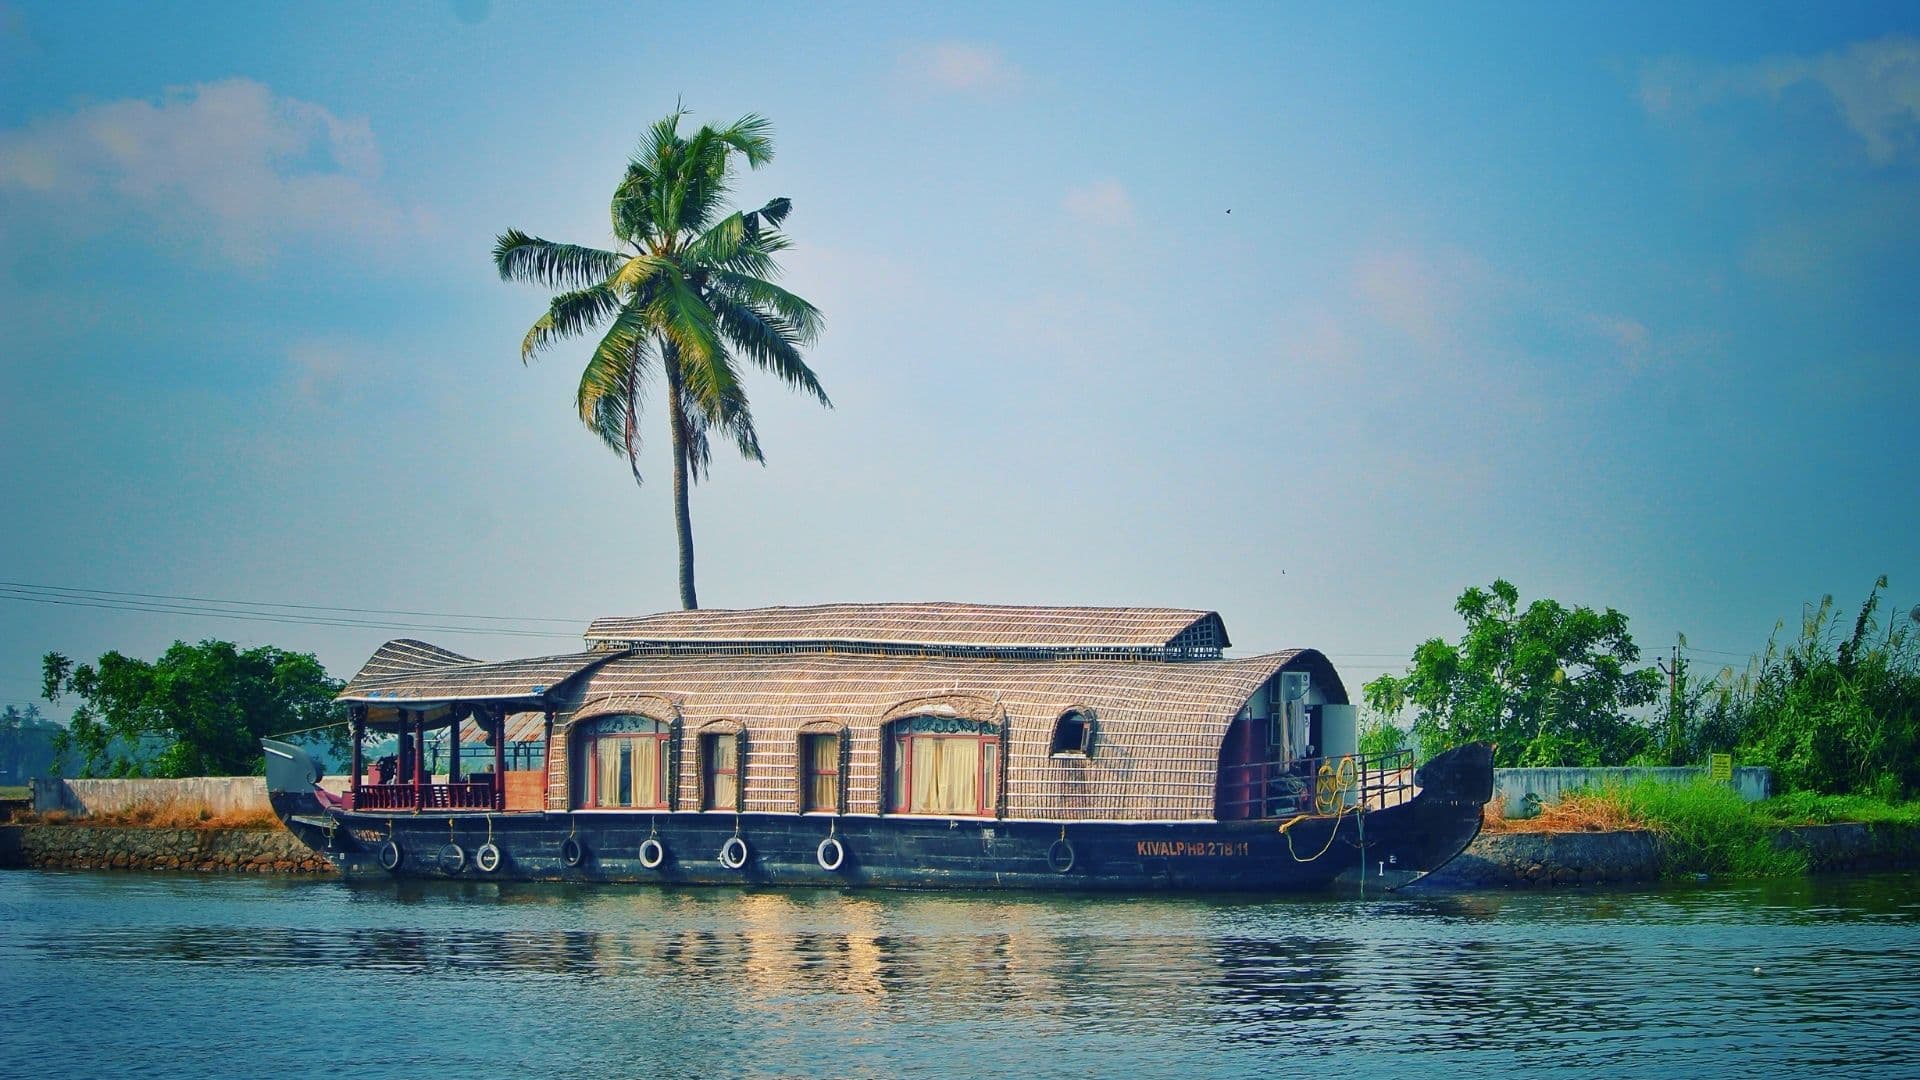 Experience the serenity of the backwaters